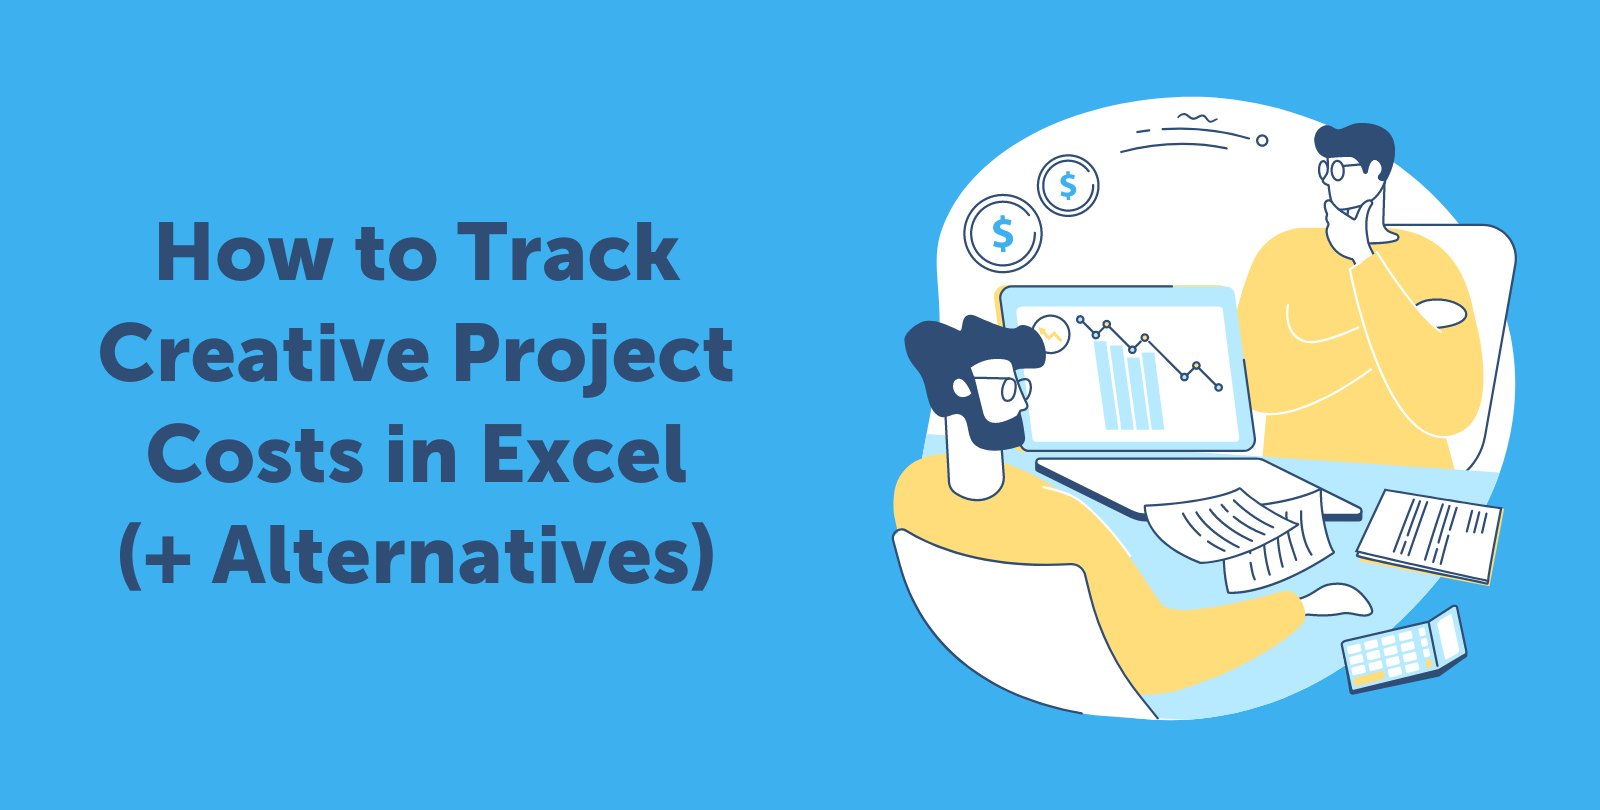 How to Track Creative Project Costs in Excel (+ Alternatives) [Video]